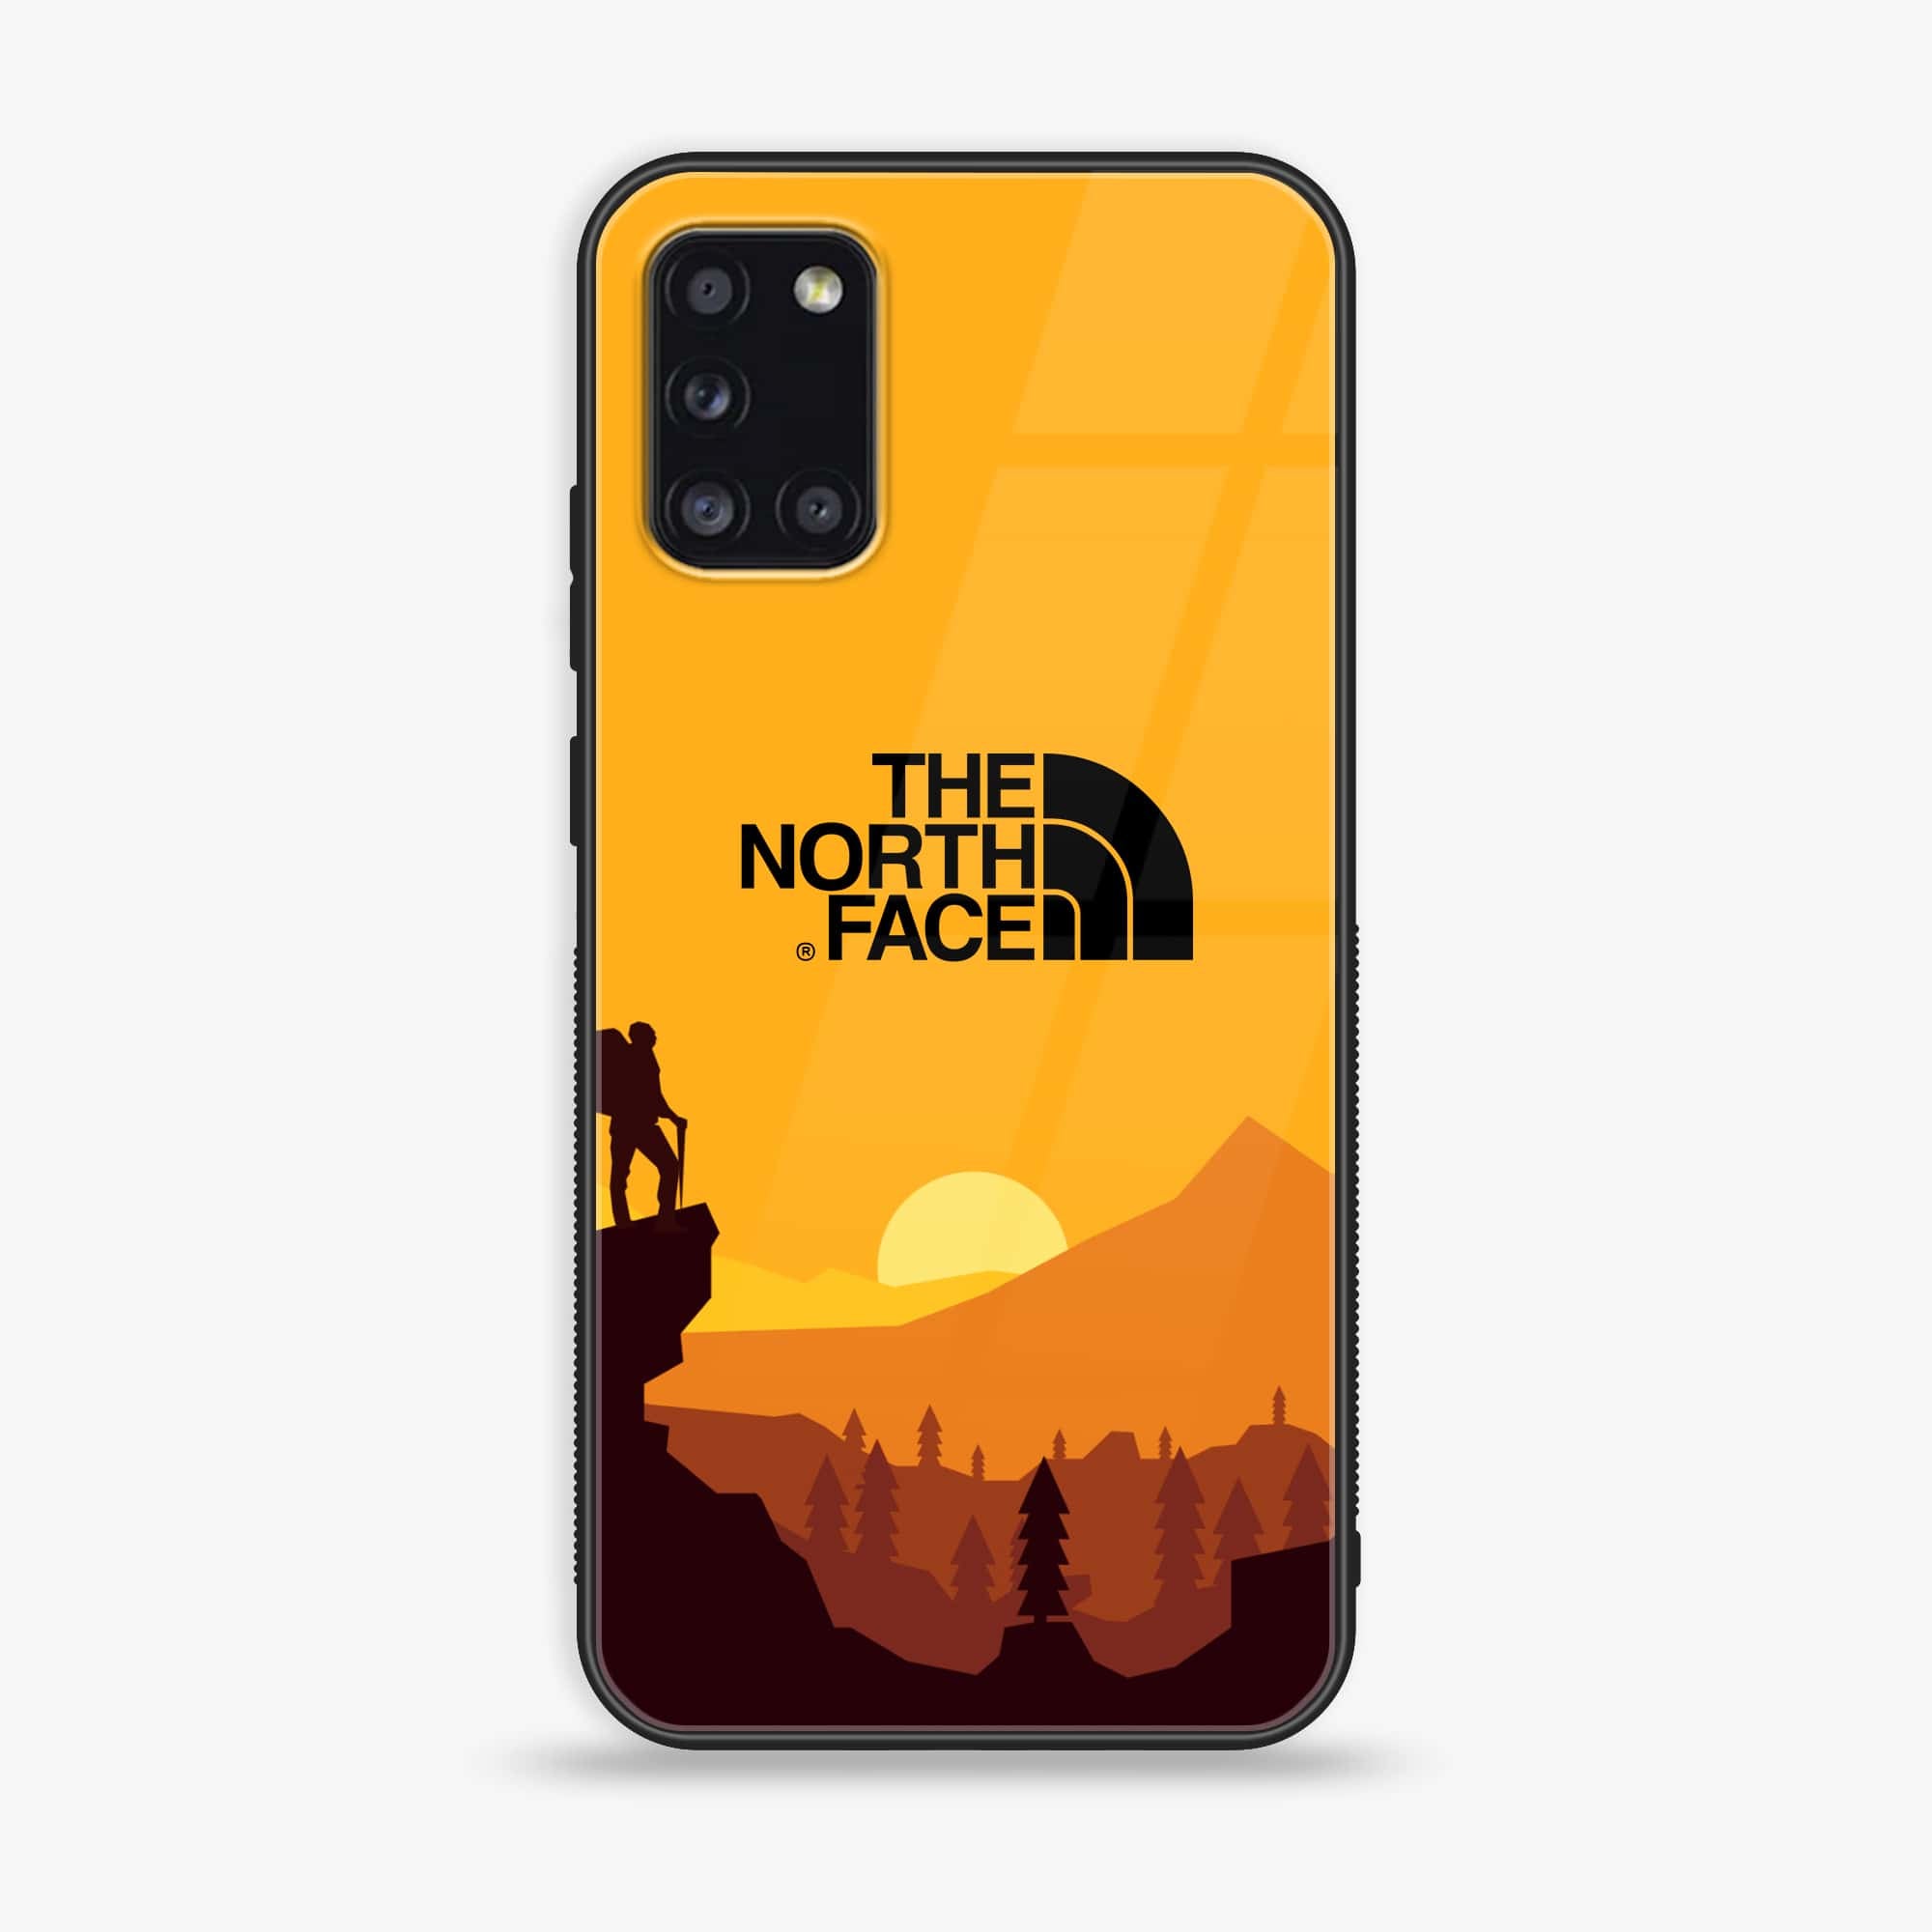 Samsung Galaxy A31 - The North Face Series - Premium Printed Glass soft Bumper shock Proof Case